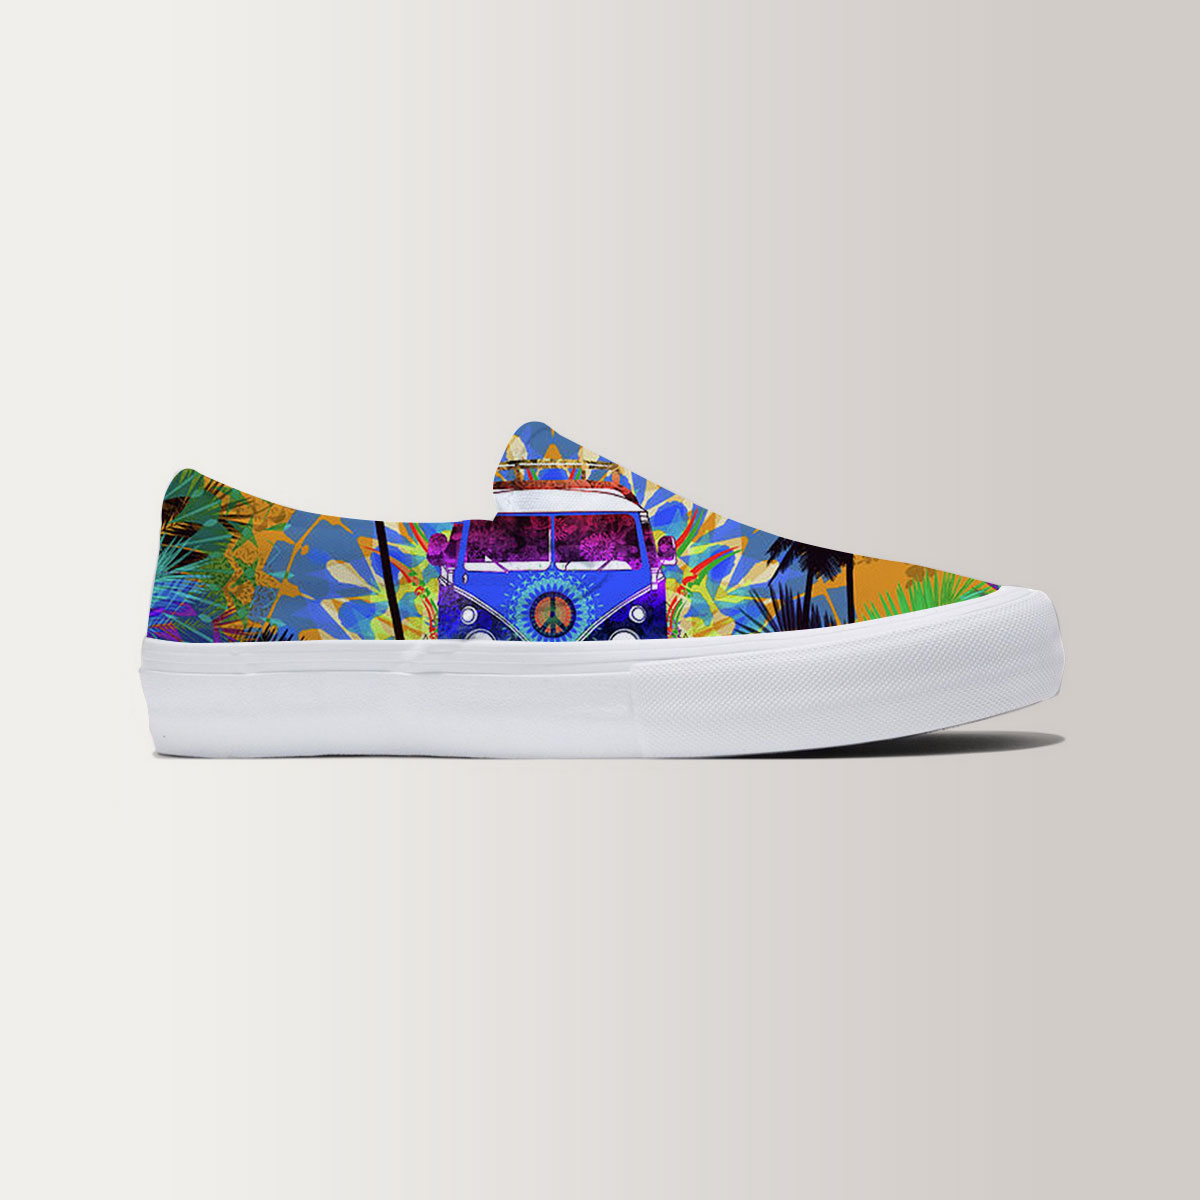 Hippie Go Camping Slip On Sneakers